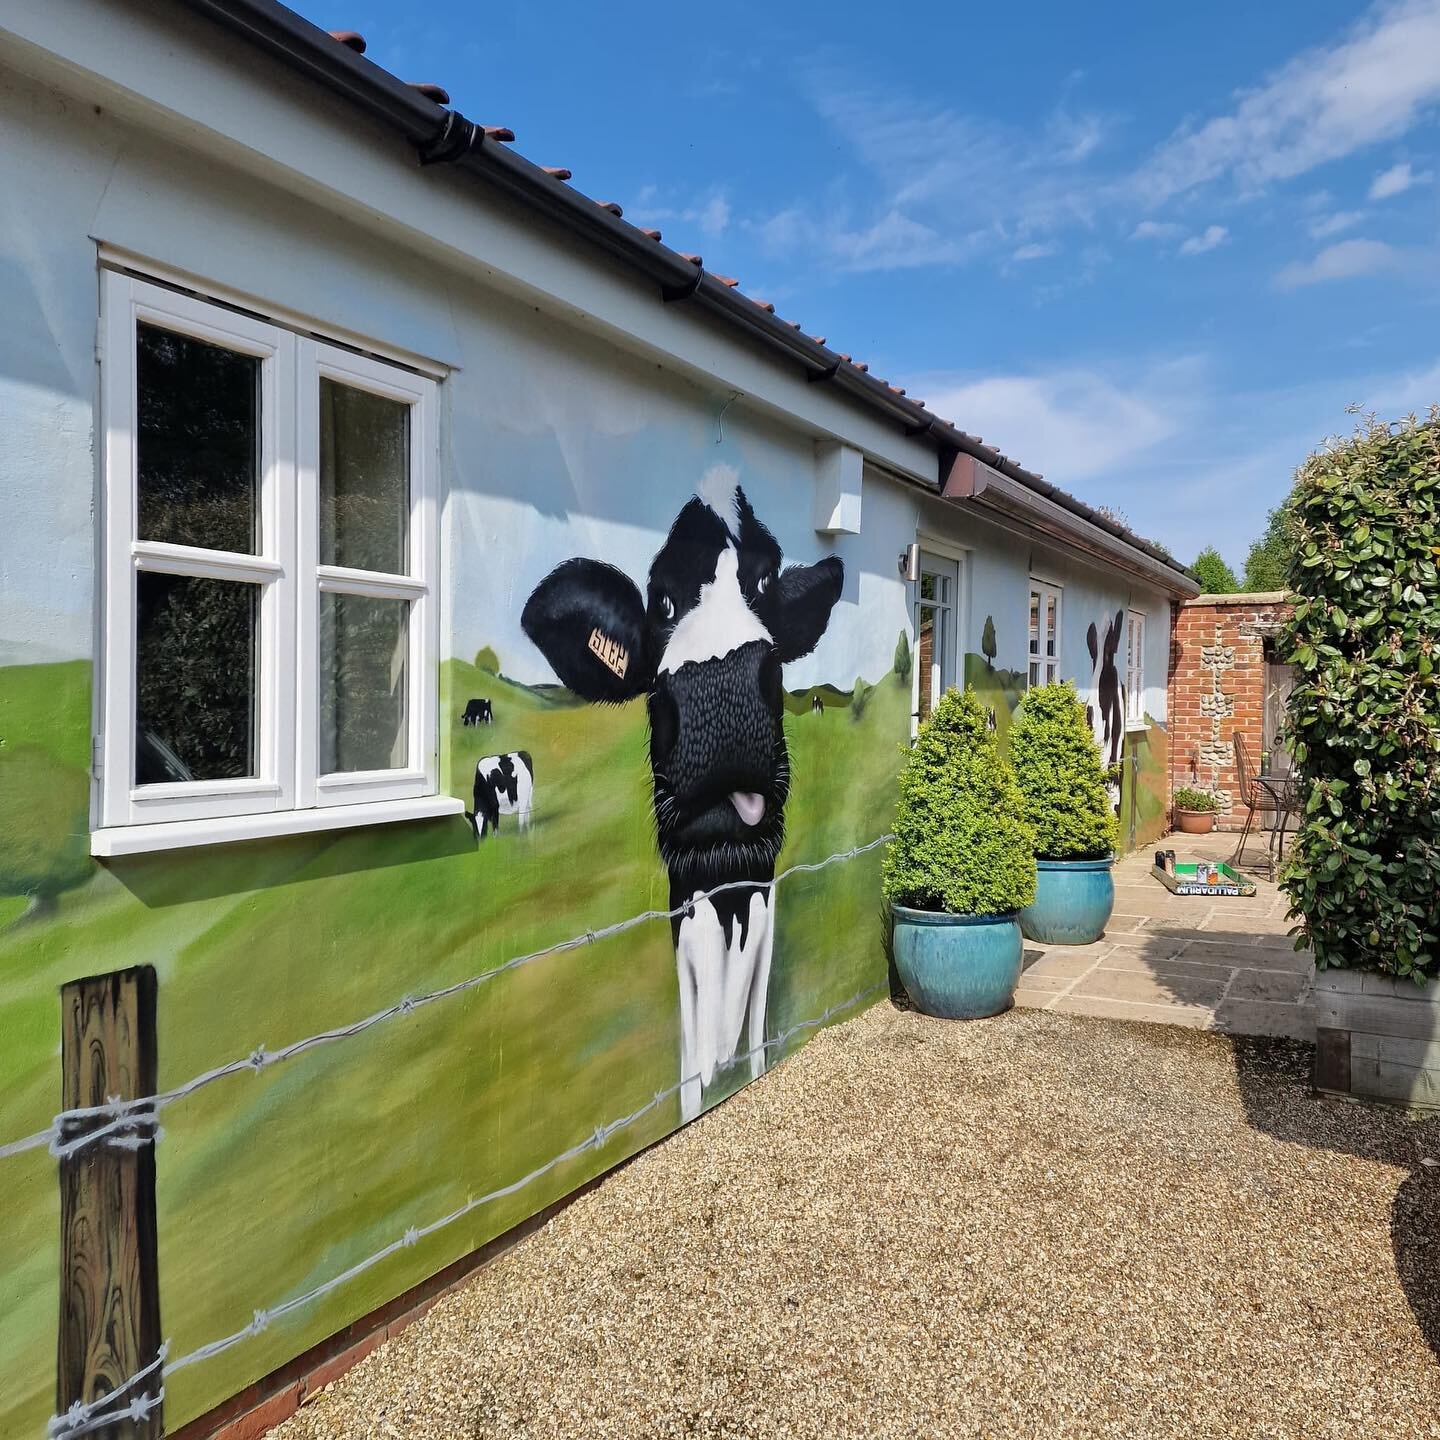 The cows of Dairy Cottage have had a bit of a touch up, by our talented friend Tony @stepthirtynine. 

They have been going strong for seven years, and have now been revitalised for the next seven! After all this time, we still enjoy their presence e